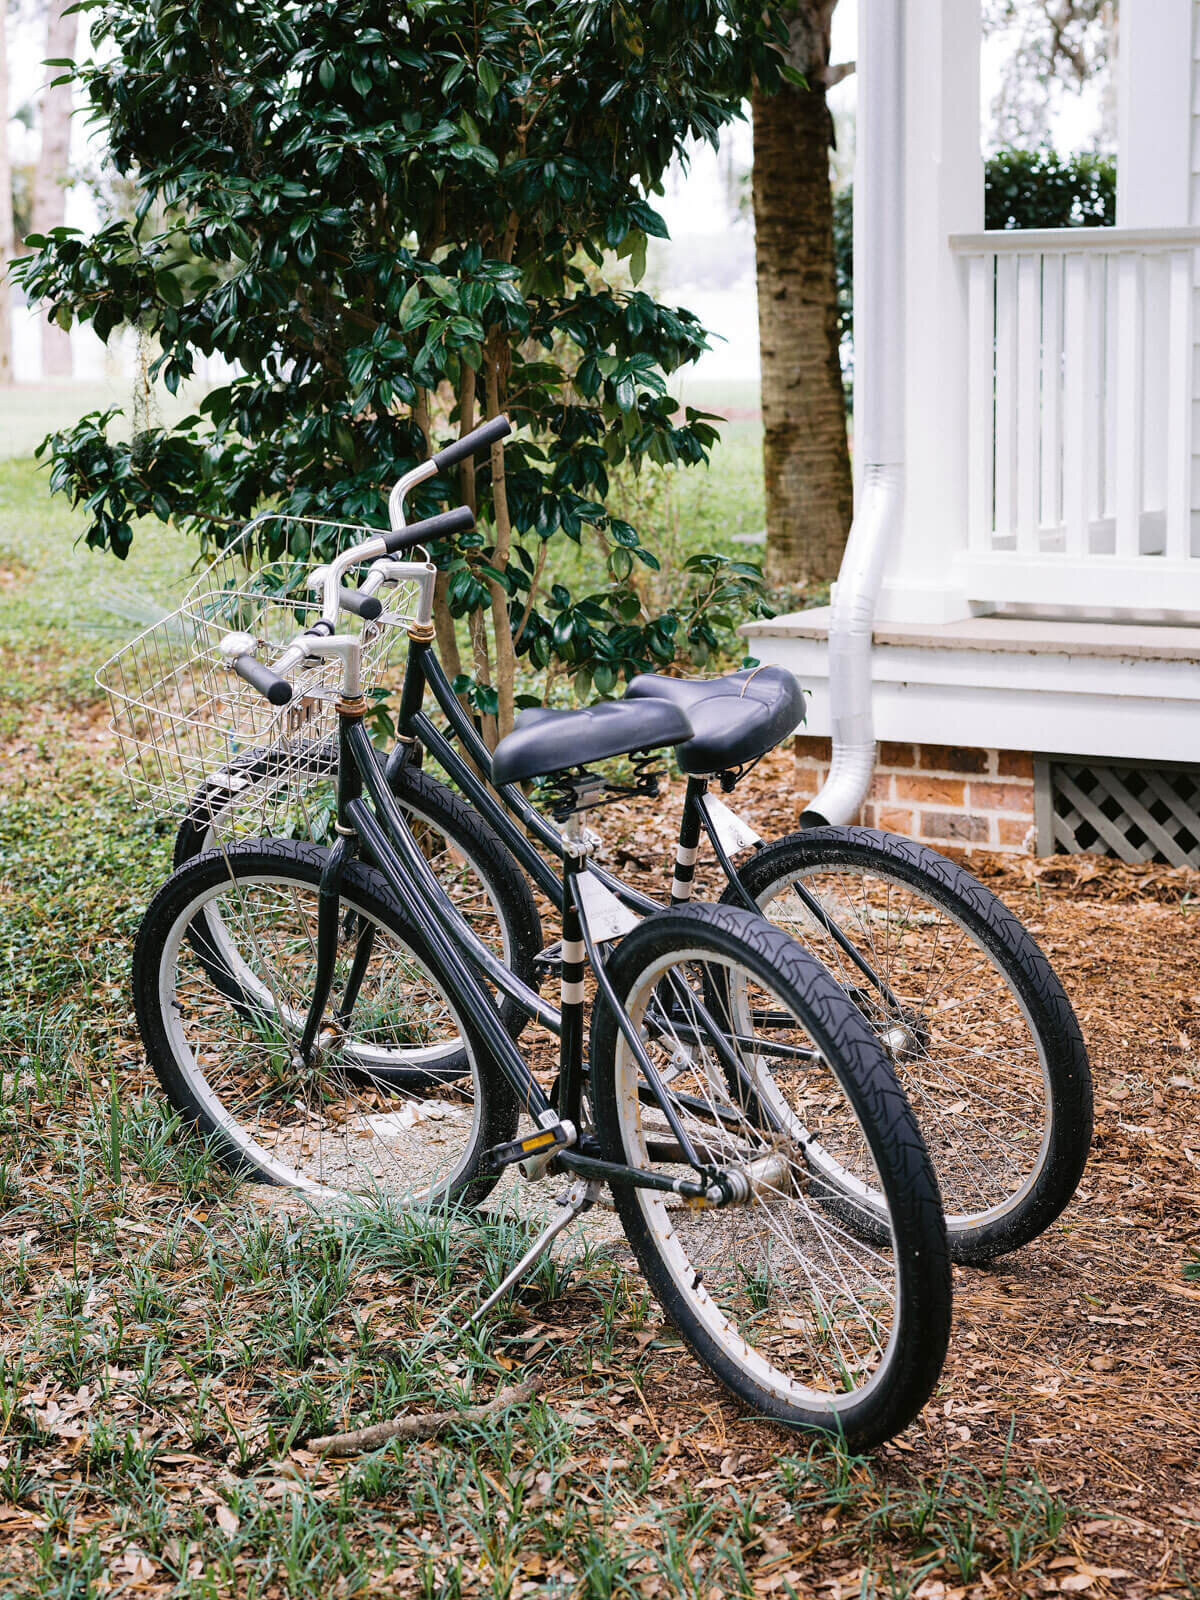 Two bicycles parked in front of a house in Montage at Palmetto Bluff. Destination wedding image by Jenny Fu Studio